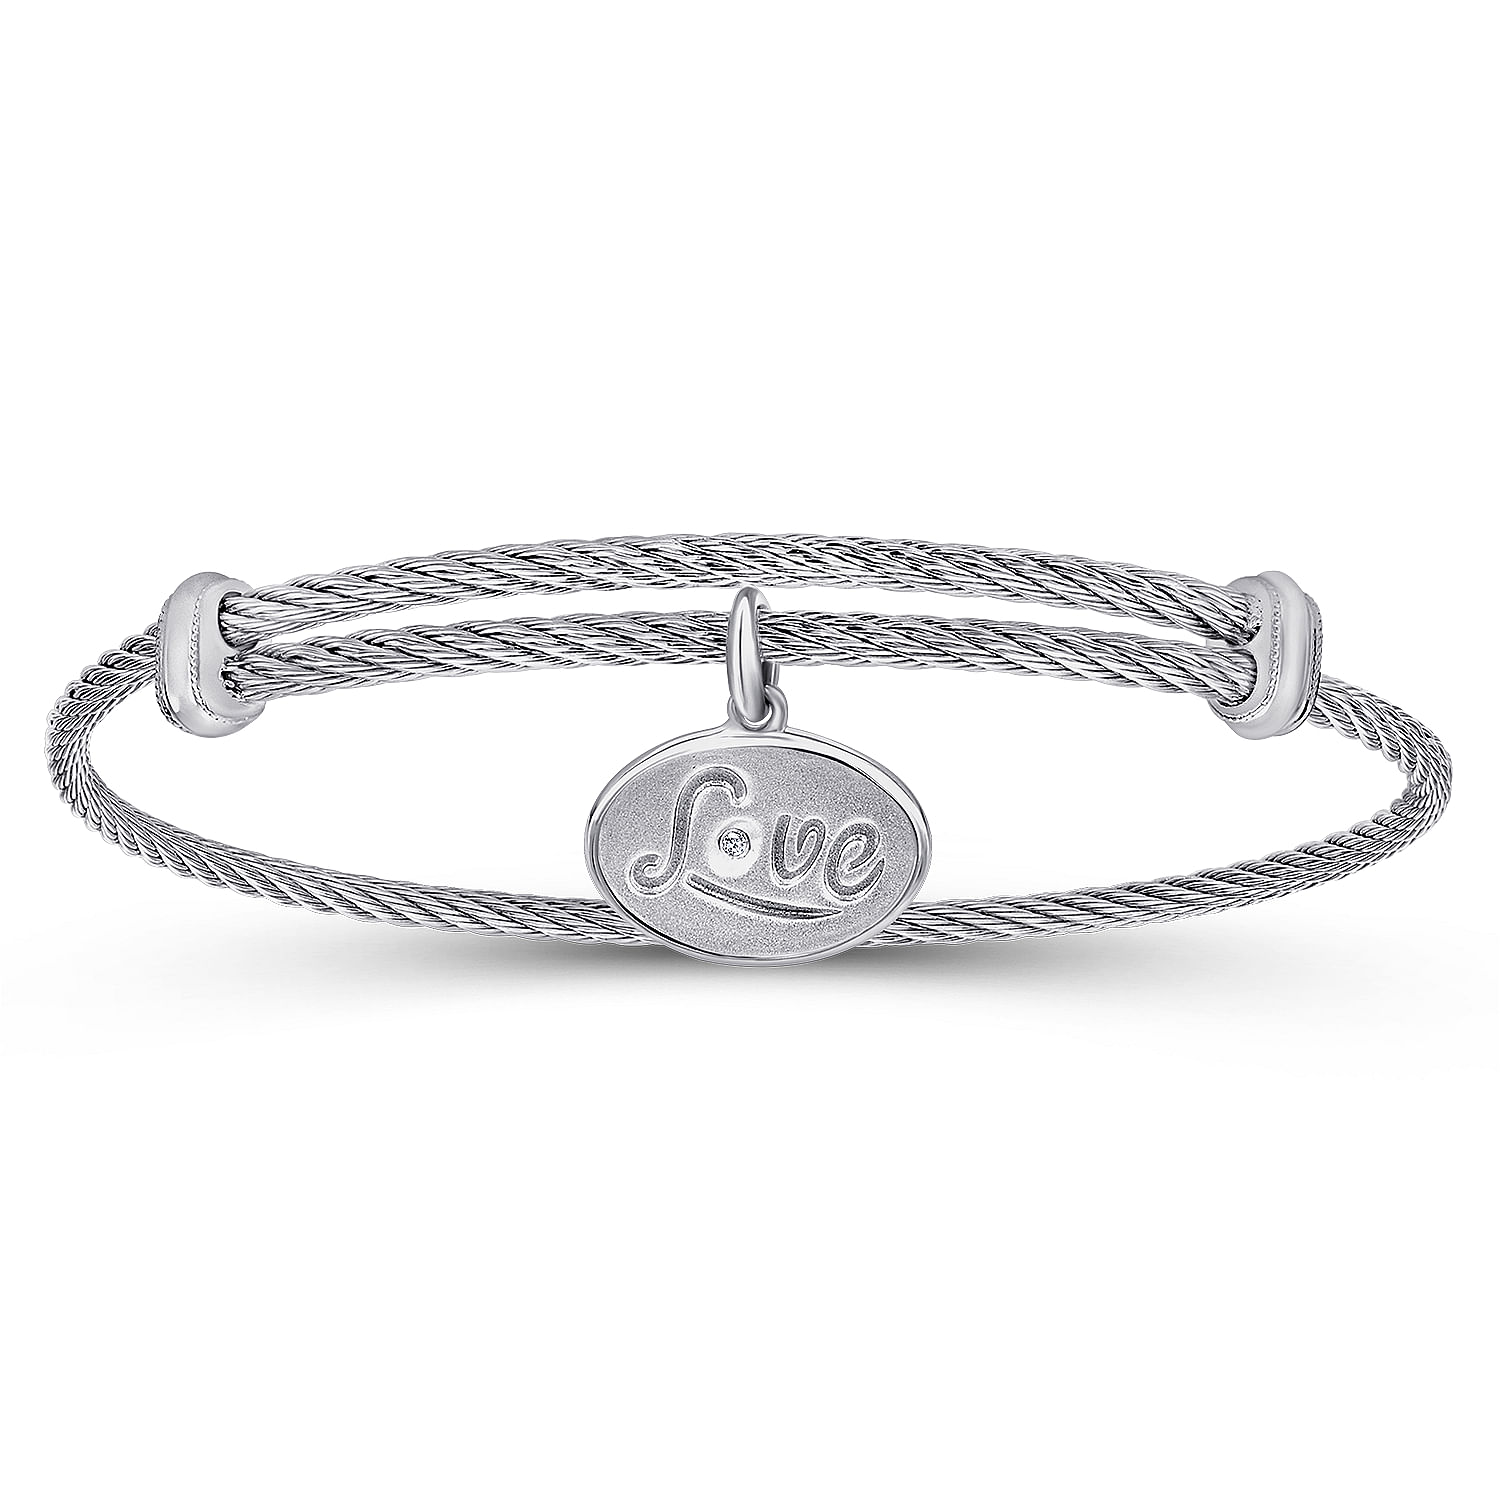 Adjustable Twisted Cable Stainless Steel Bangle with Sterling Silver Diamond Love Charm